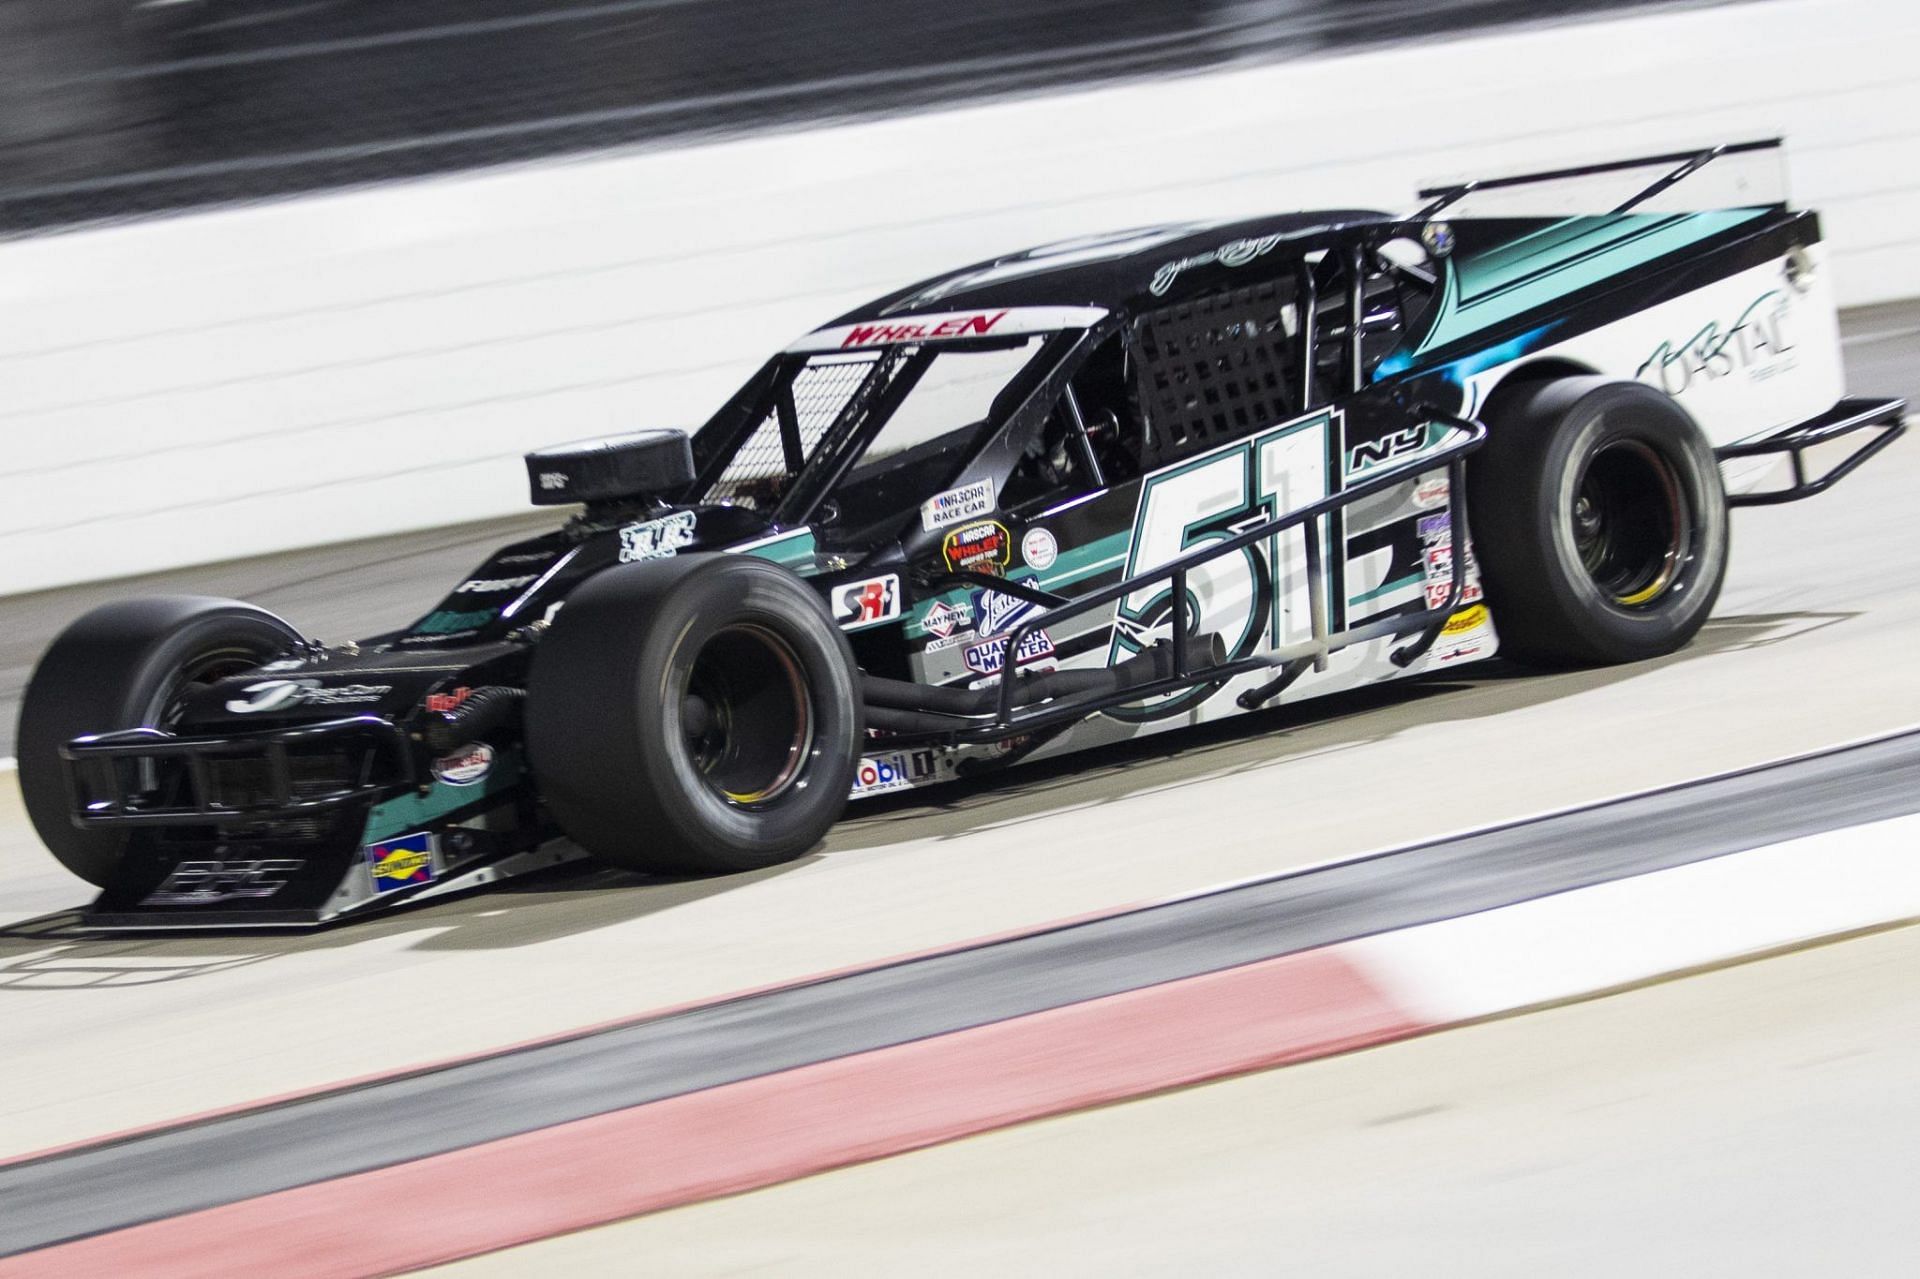 Justin Bonsignore, driver of the No. 51 Coastal Fiber LLC Chevrolet, in action during the Virginia Is For Racing Lovers 200 at Martinsville Speedway on April 8, 2021. (Adam Glanzman/NASCAR)